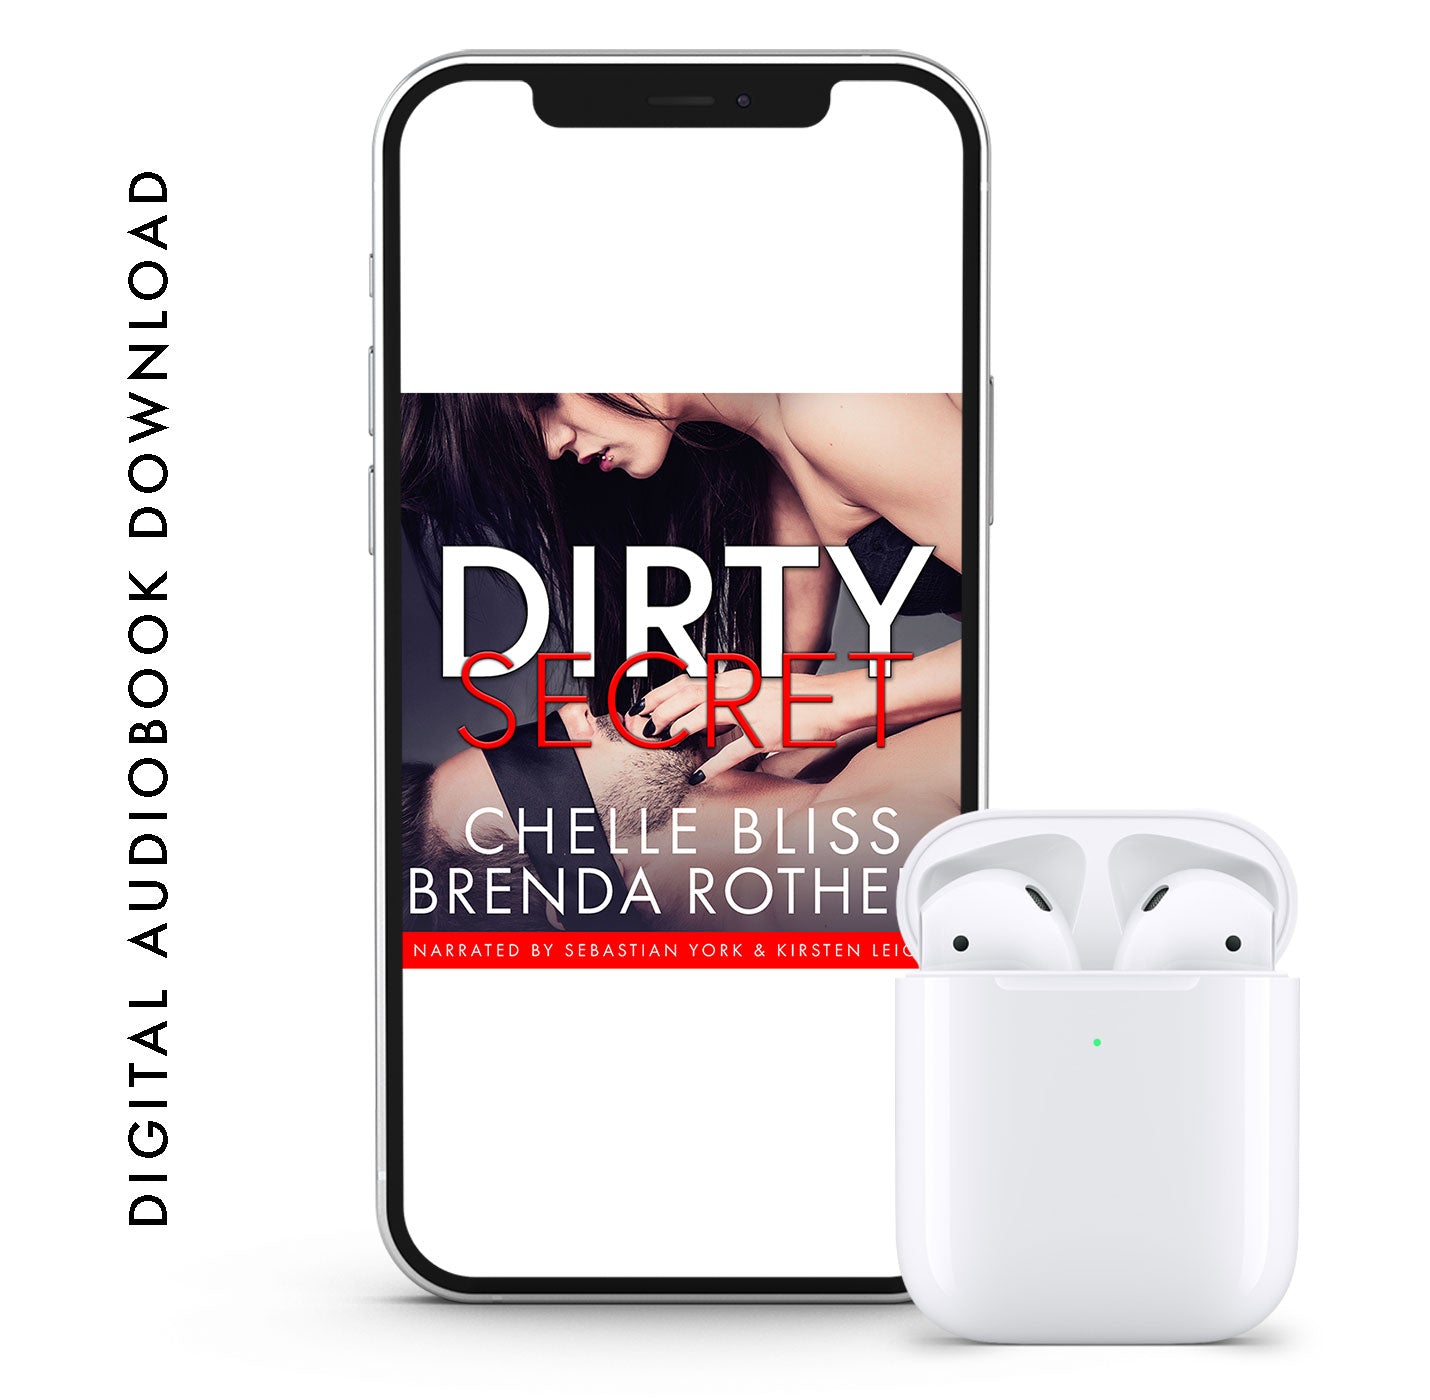 dirty secret romance audiobook by chelle bliss and brenda rothert woman touching blindfolded man 